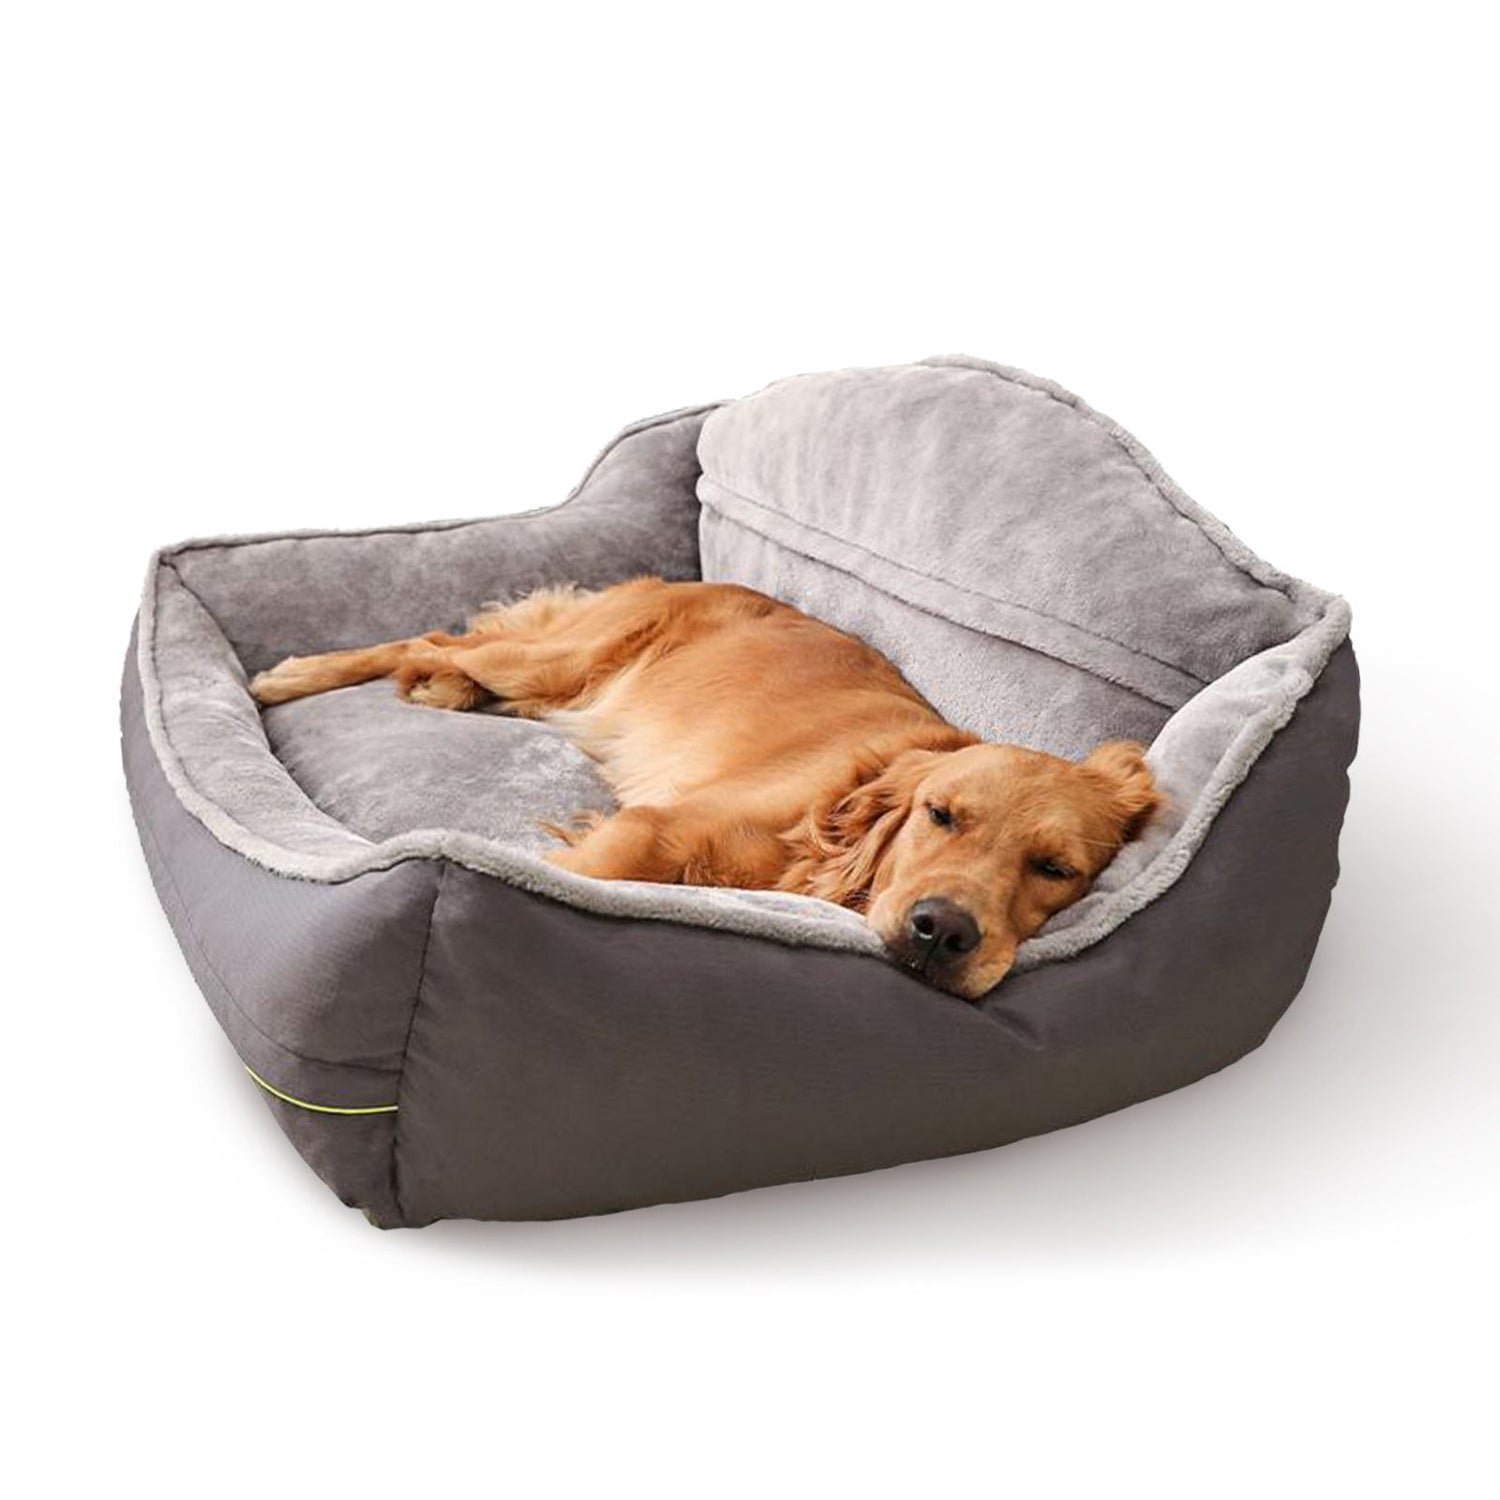 Sofa-Style Dog Bed Waterproof Washable Soft High Back Comfy Sleeping Kennel M-Pet Beds-PEROZ Accessories